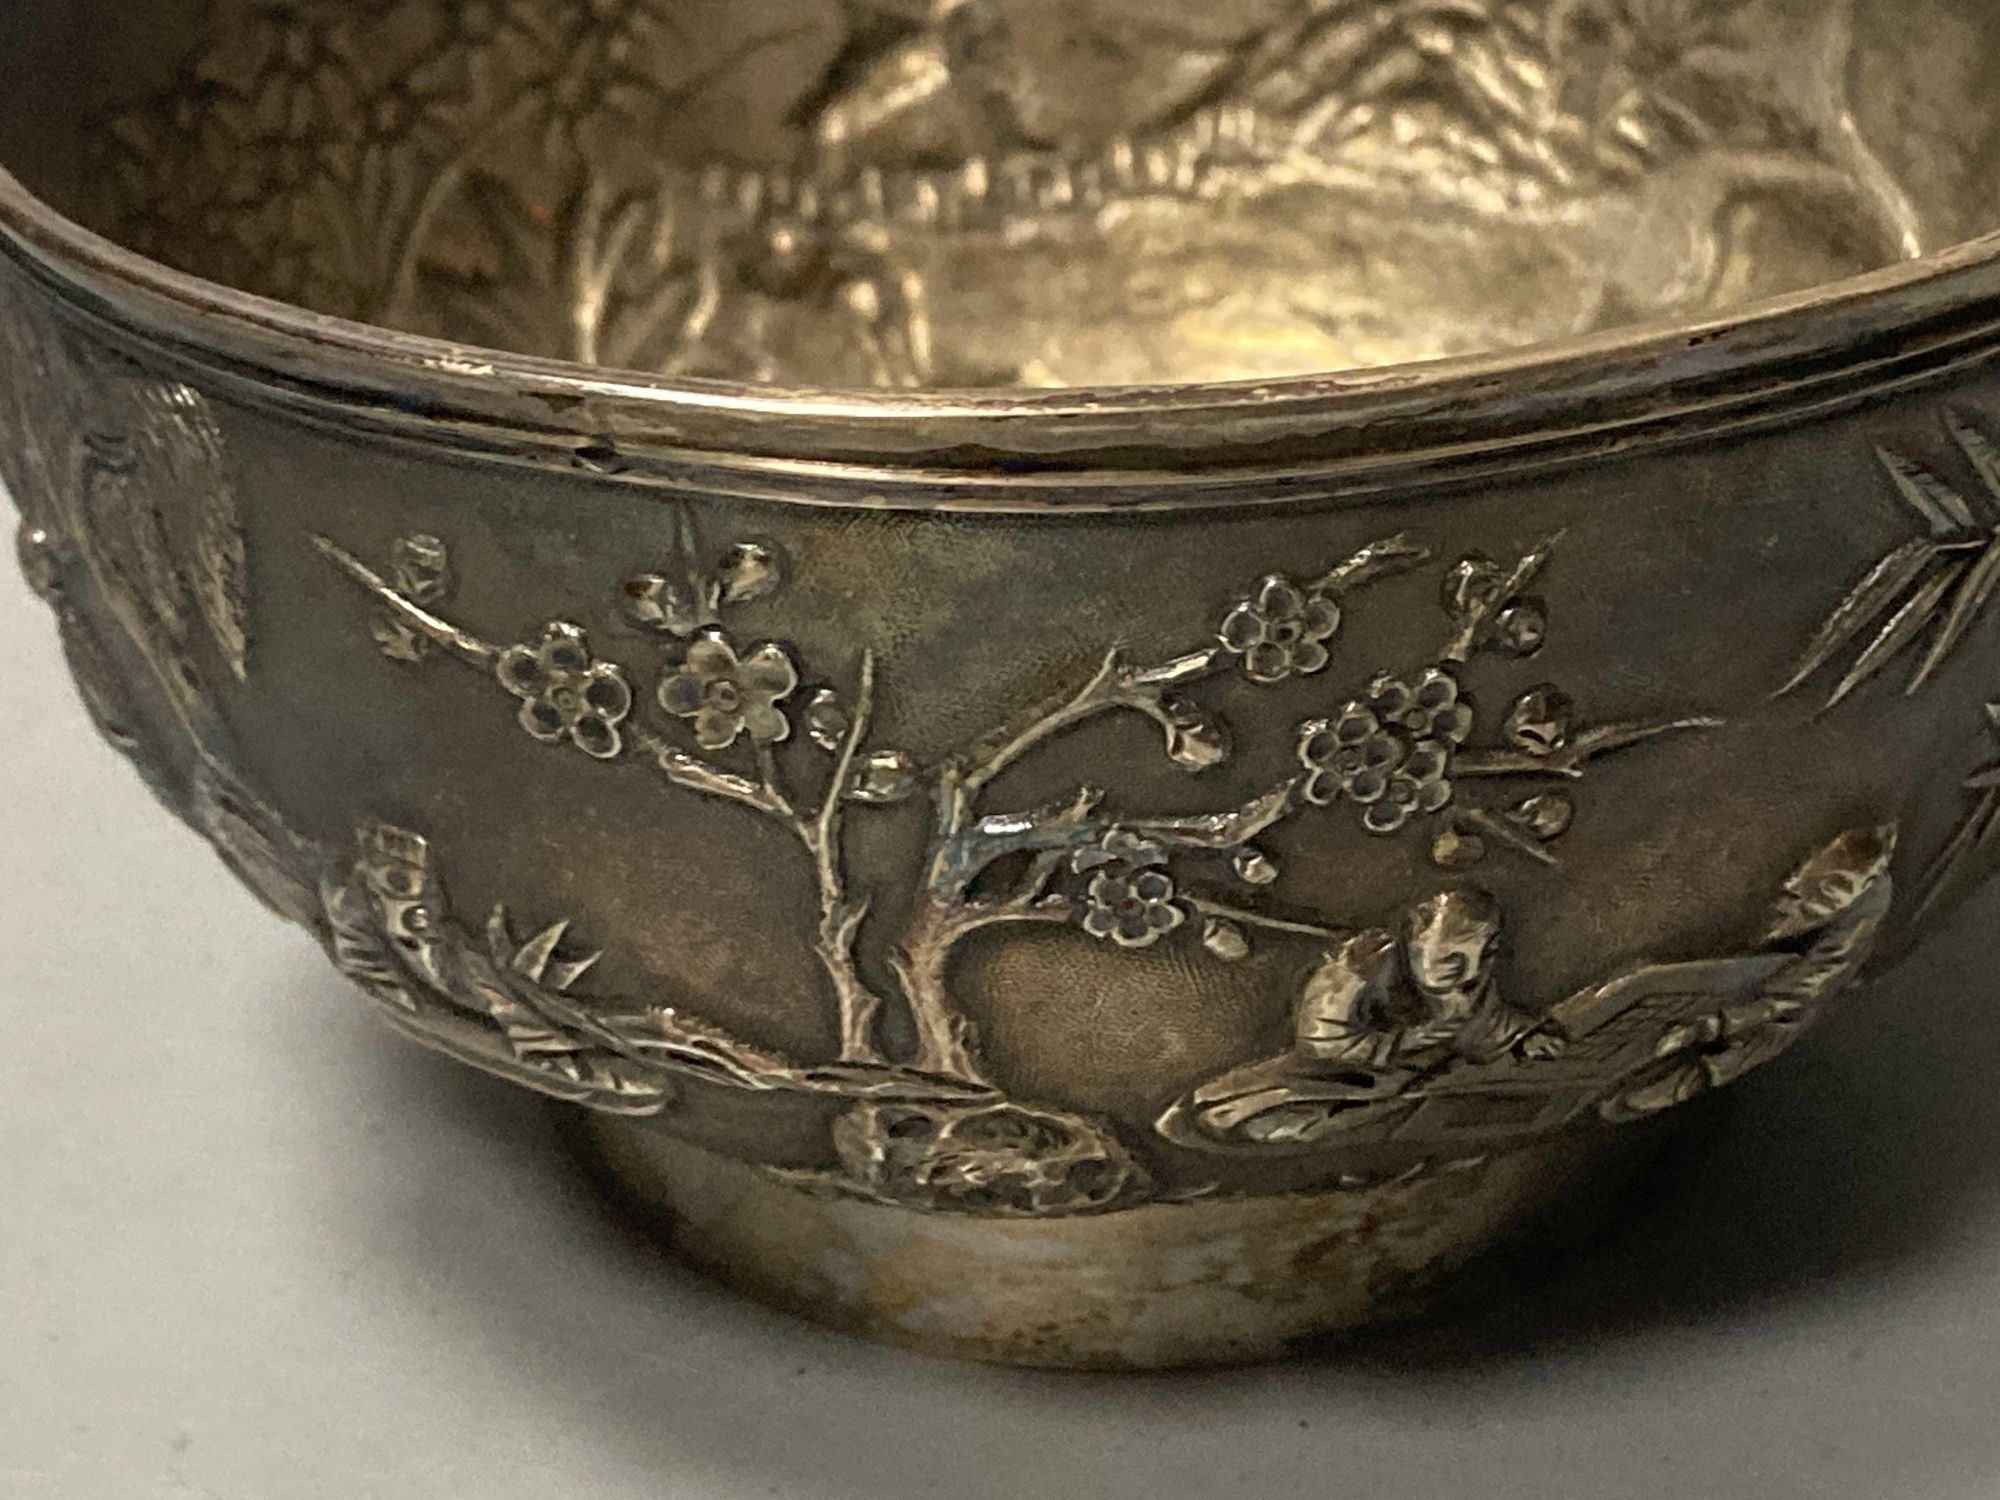 An early 20th century Chinese Export white metal small bowl, by Wang Hing, engraved International Cup Hong Kong, 1903,